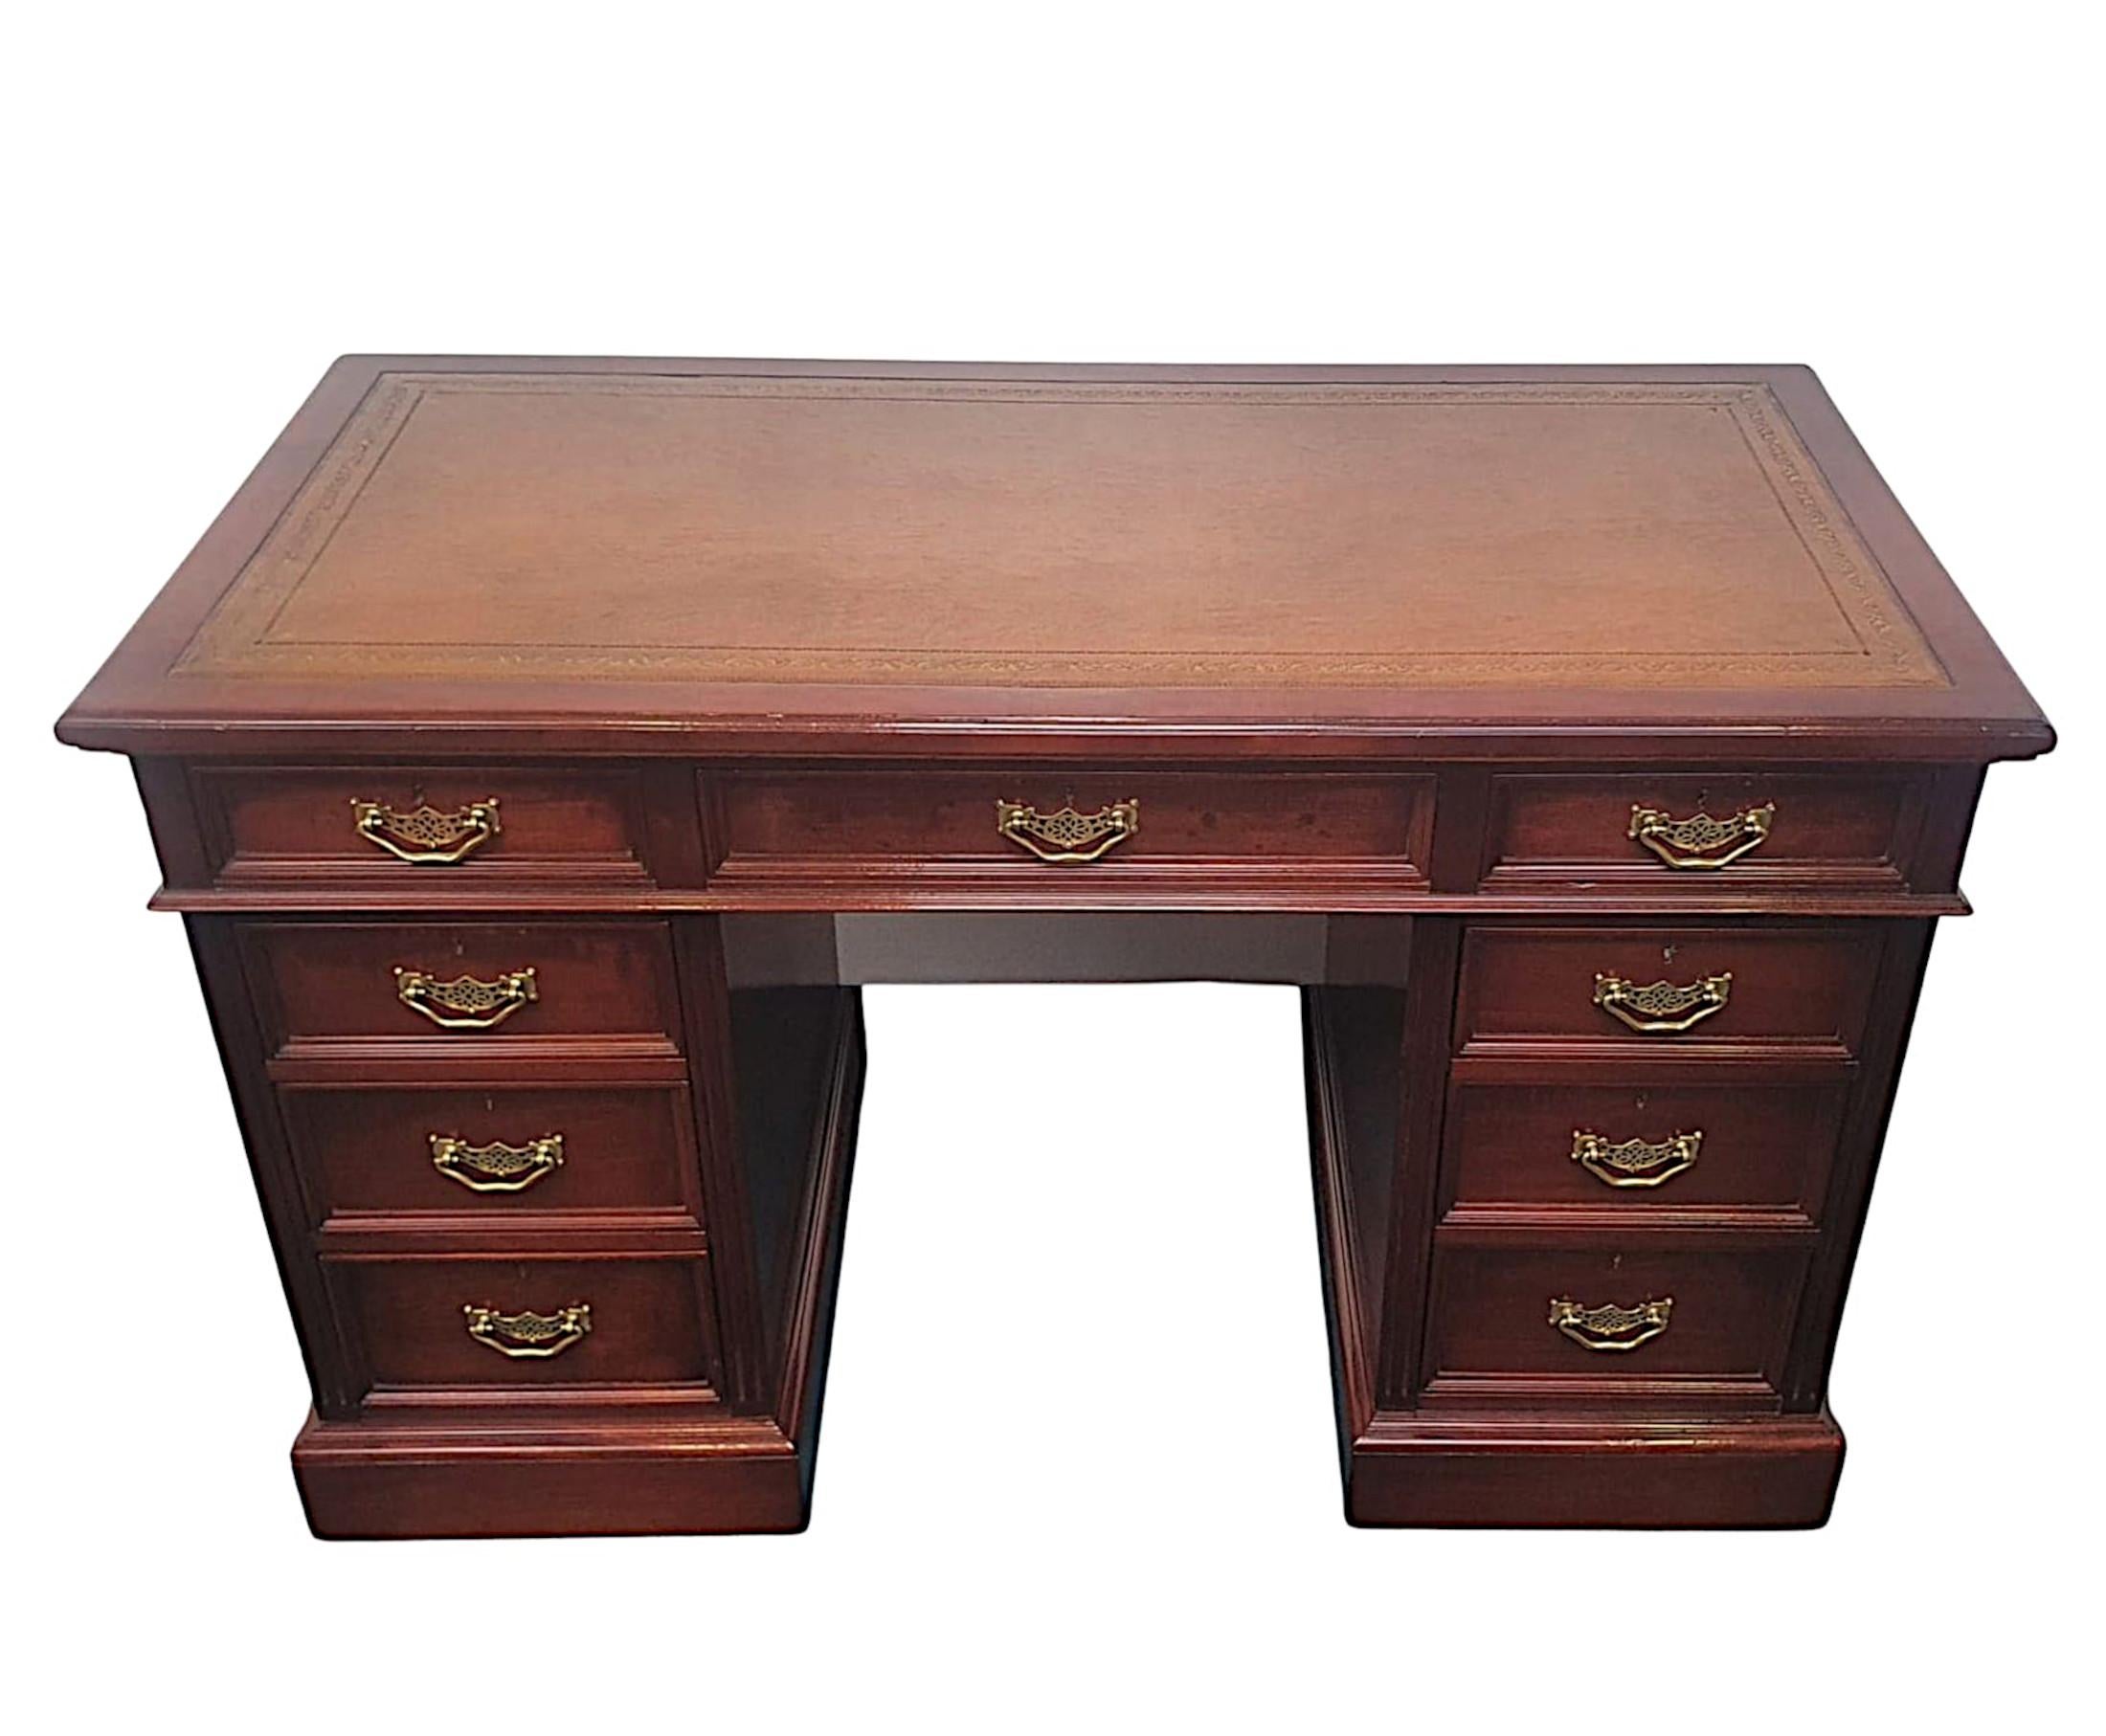 Victorian Very Fine 19th Century Nine Drawer Desk by Shoolbred of London